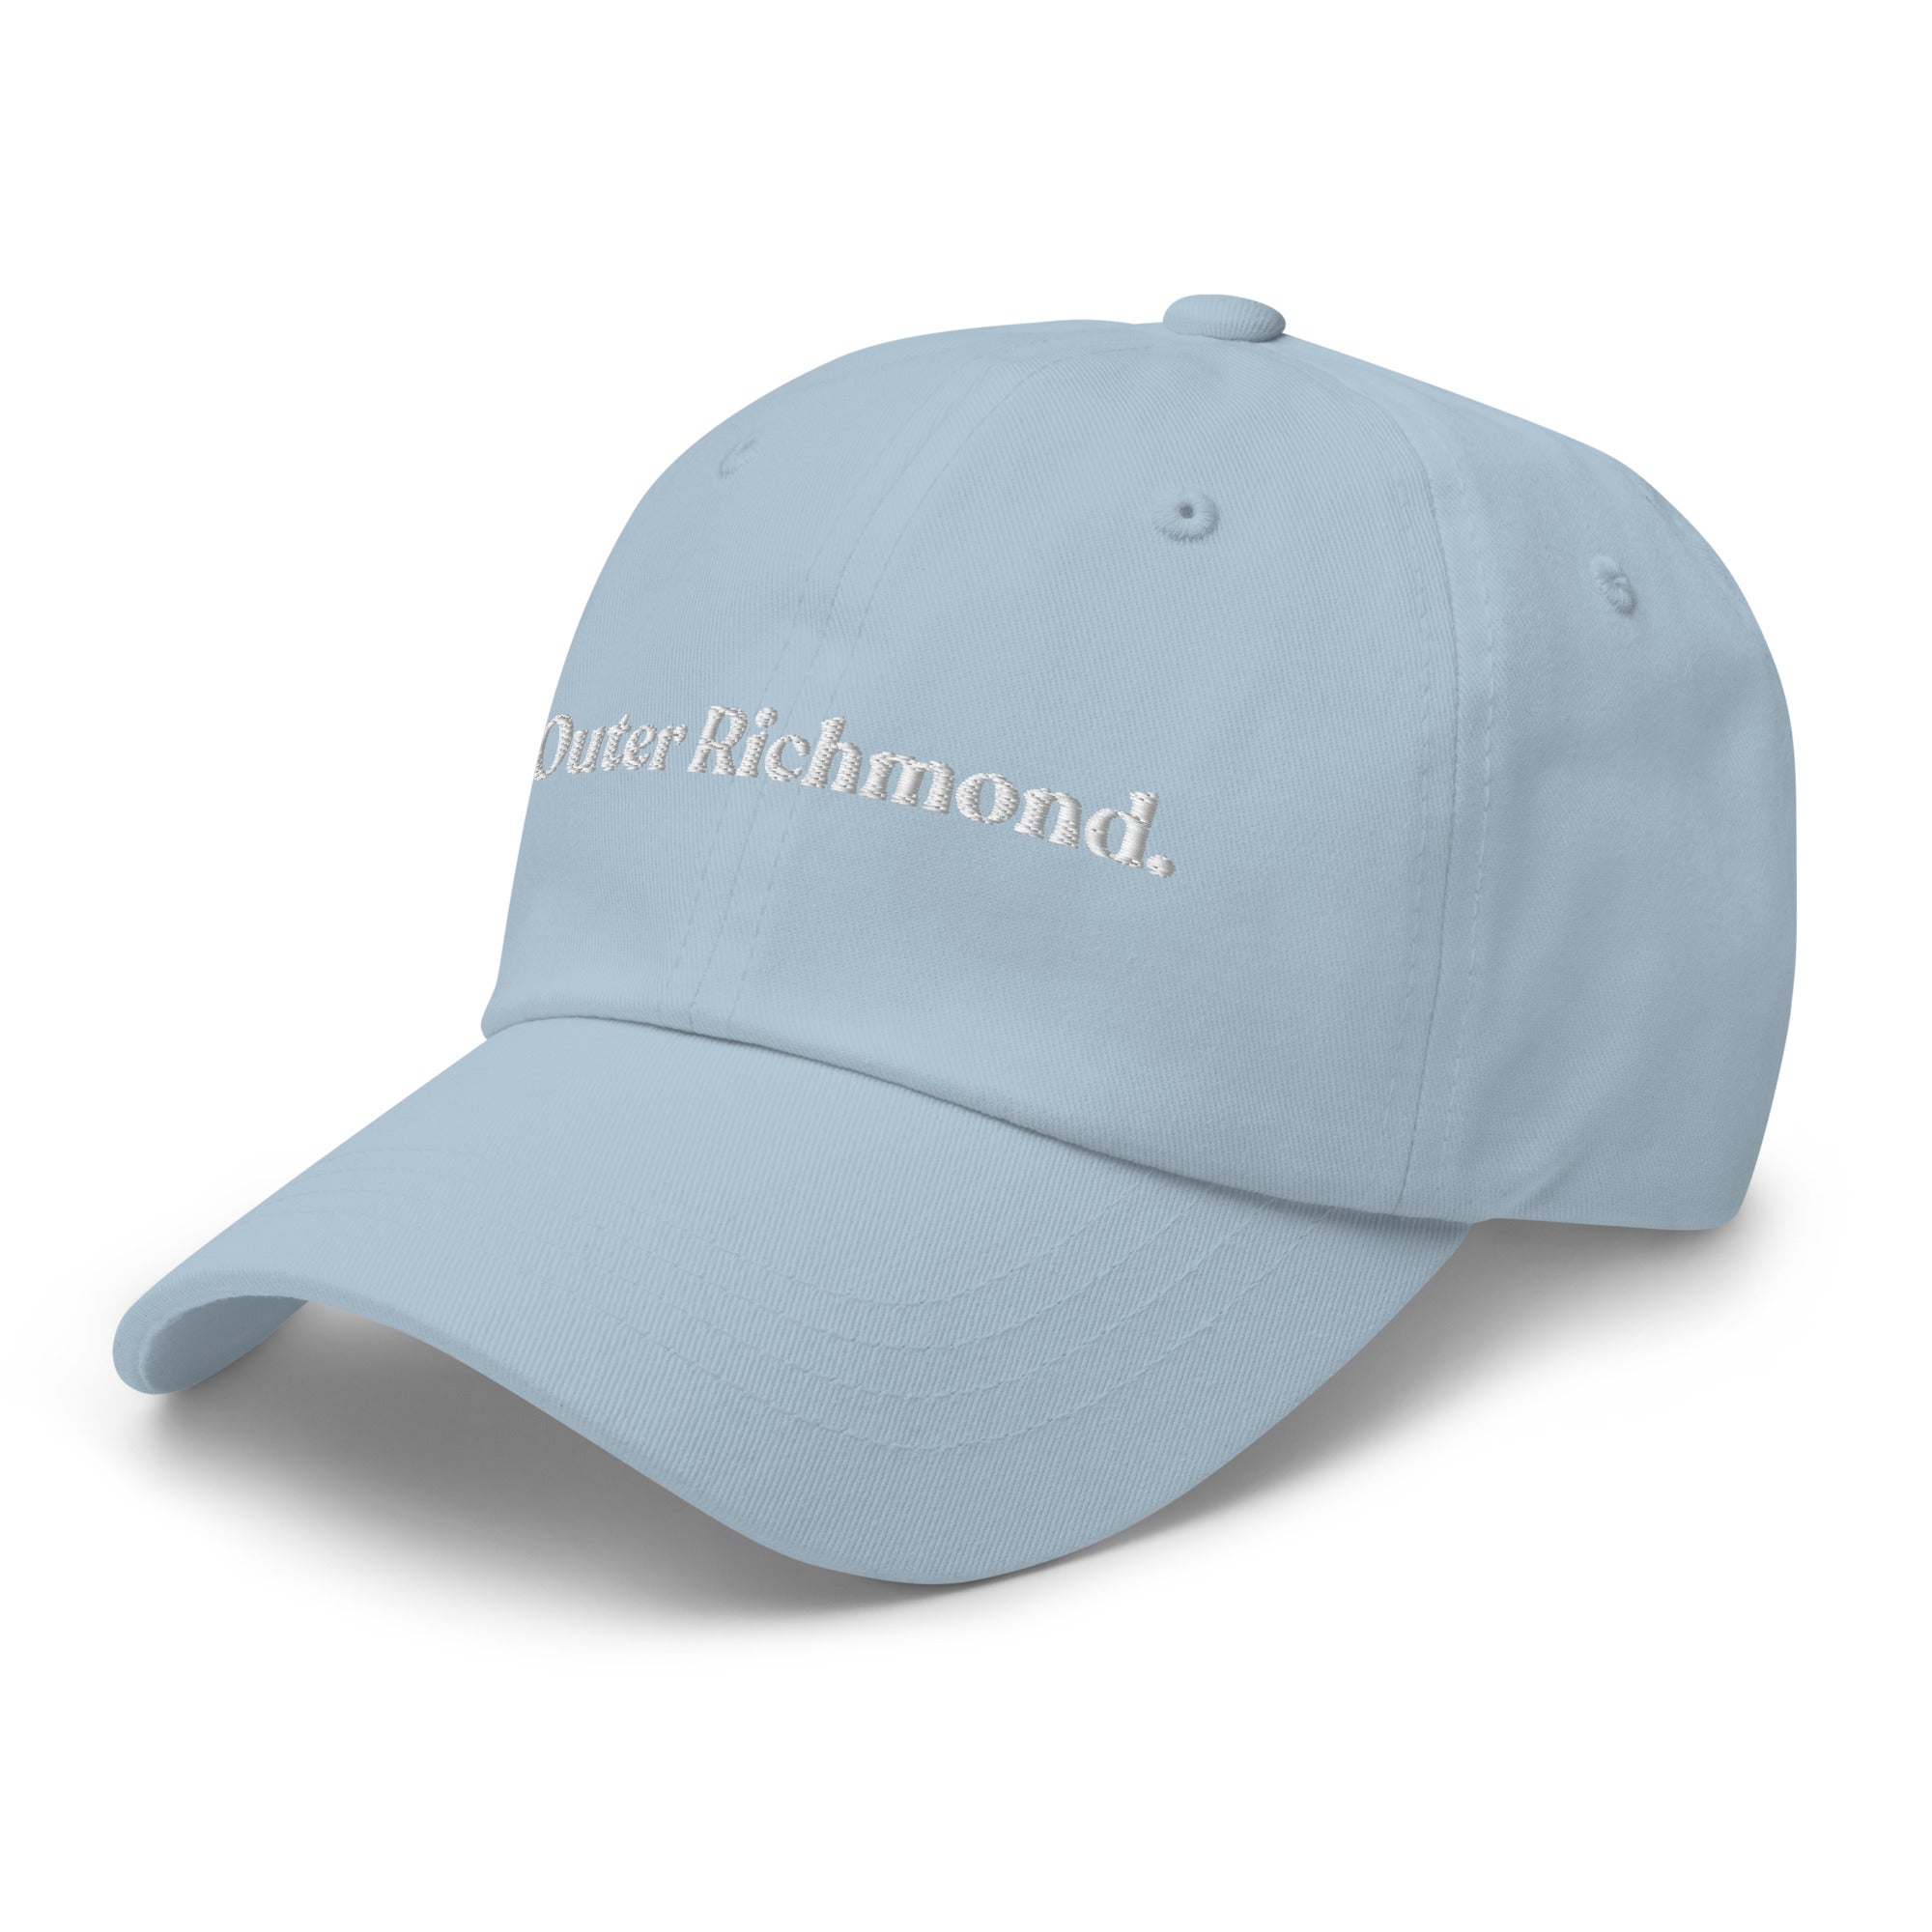 Classic Dad Hat - Outer Richmond | San Francisco, CA